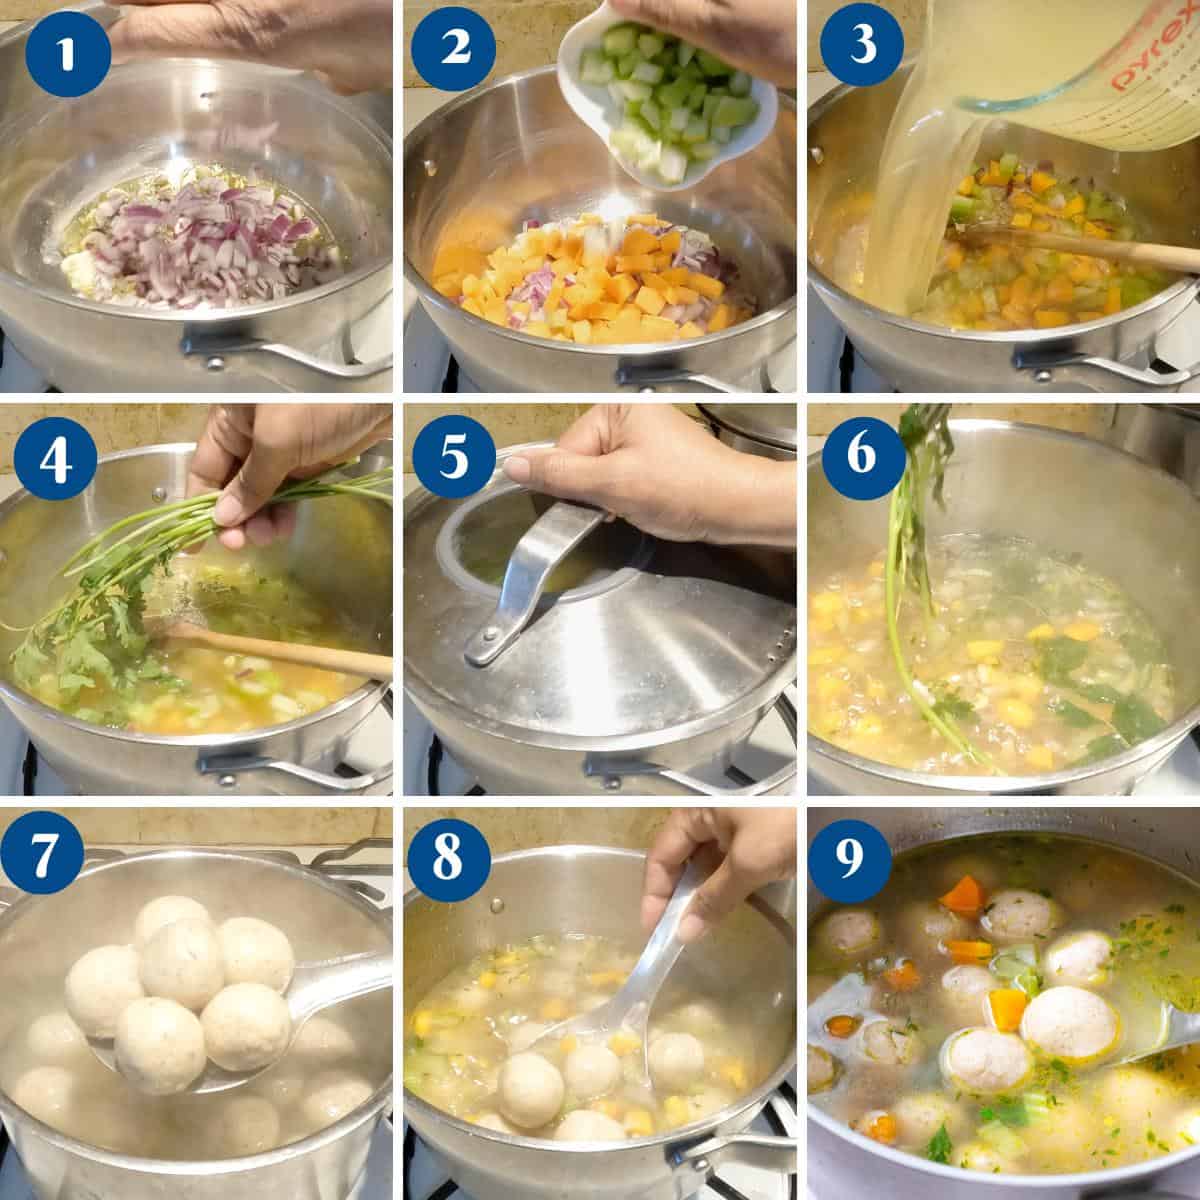 Progress pictures making the chicken soup with matzo balls.